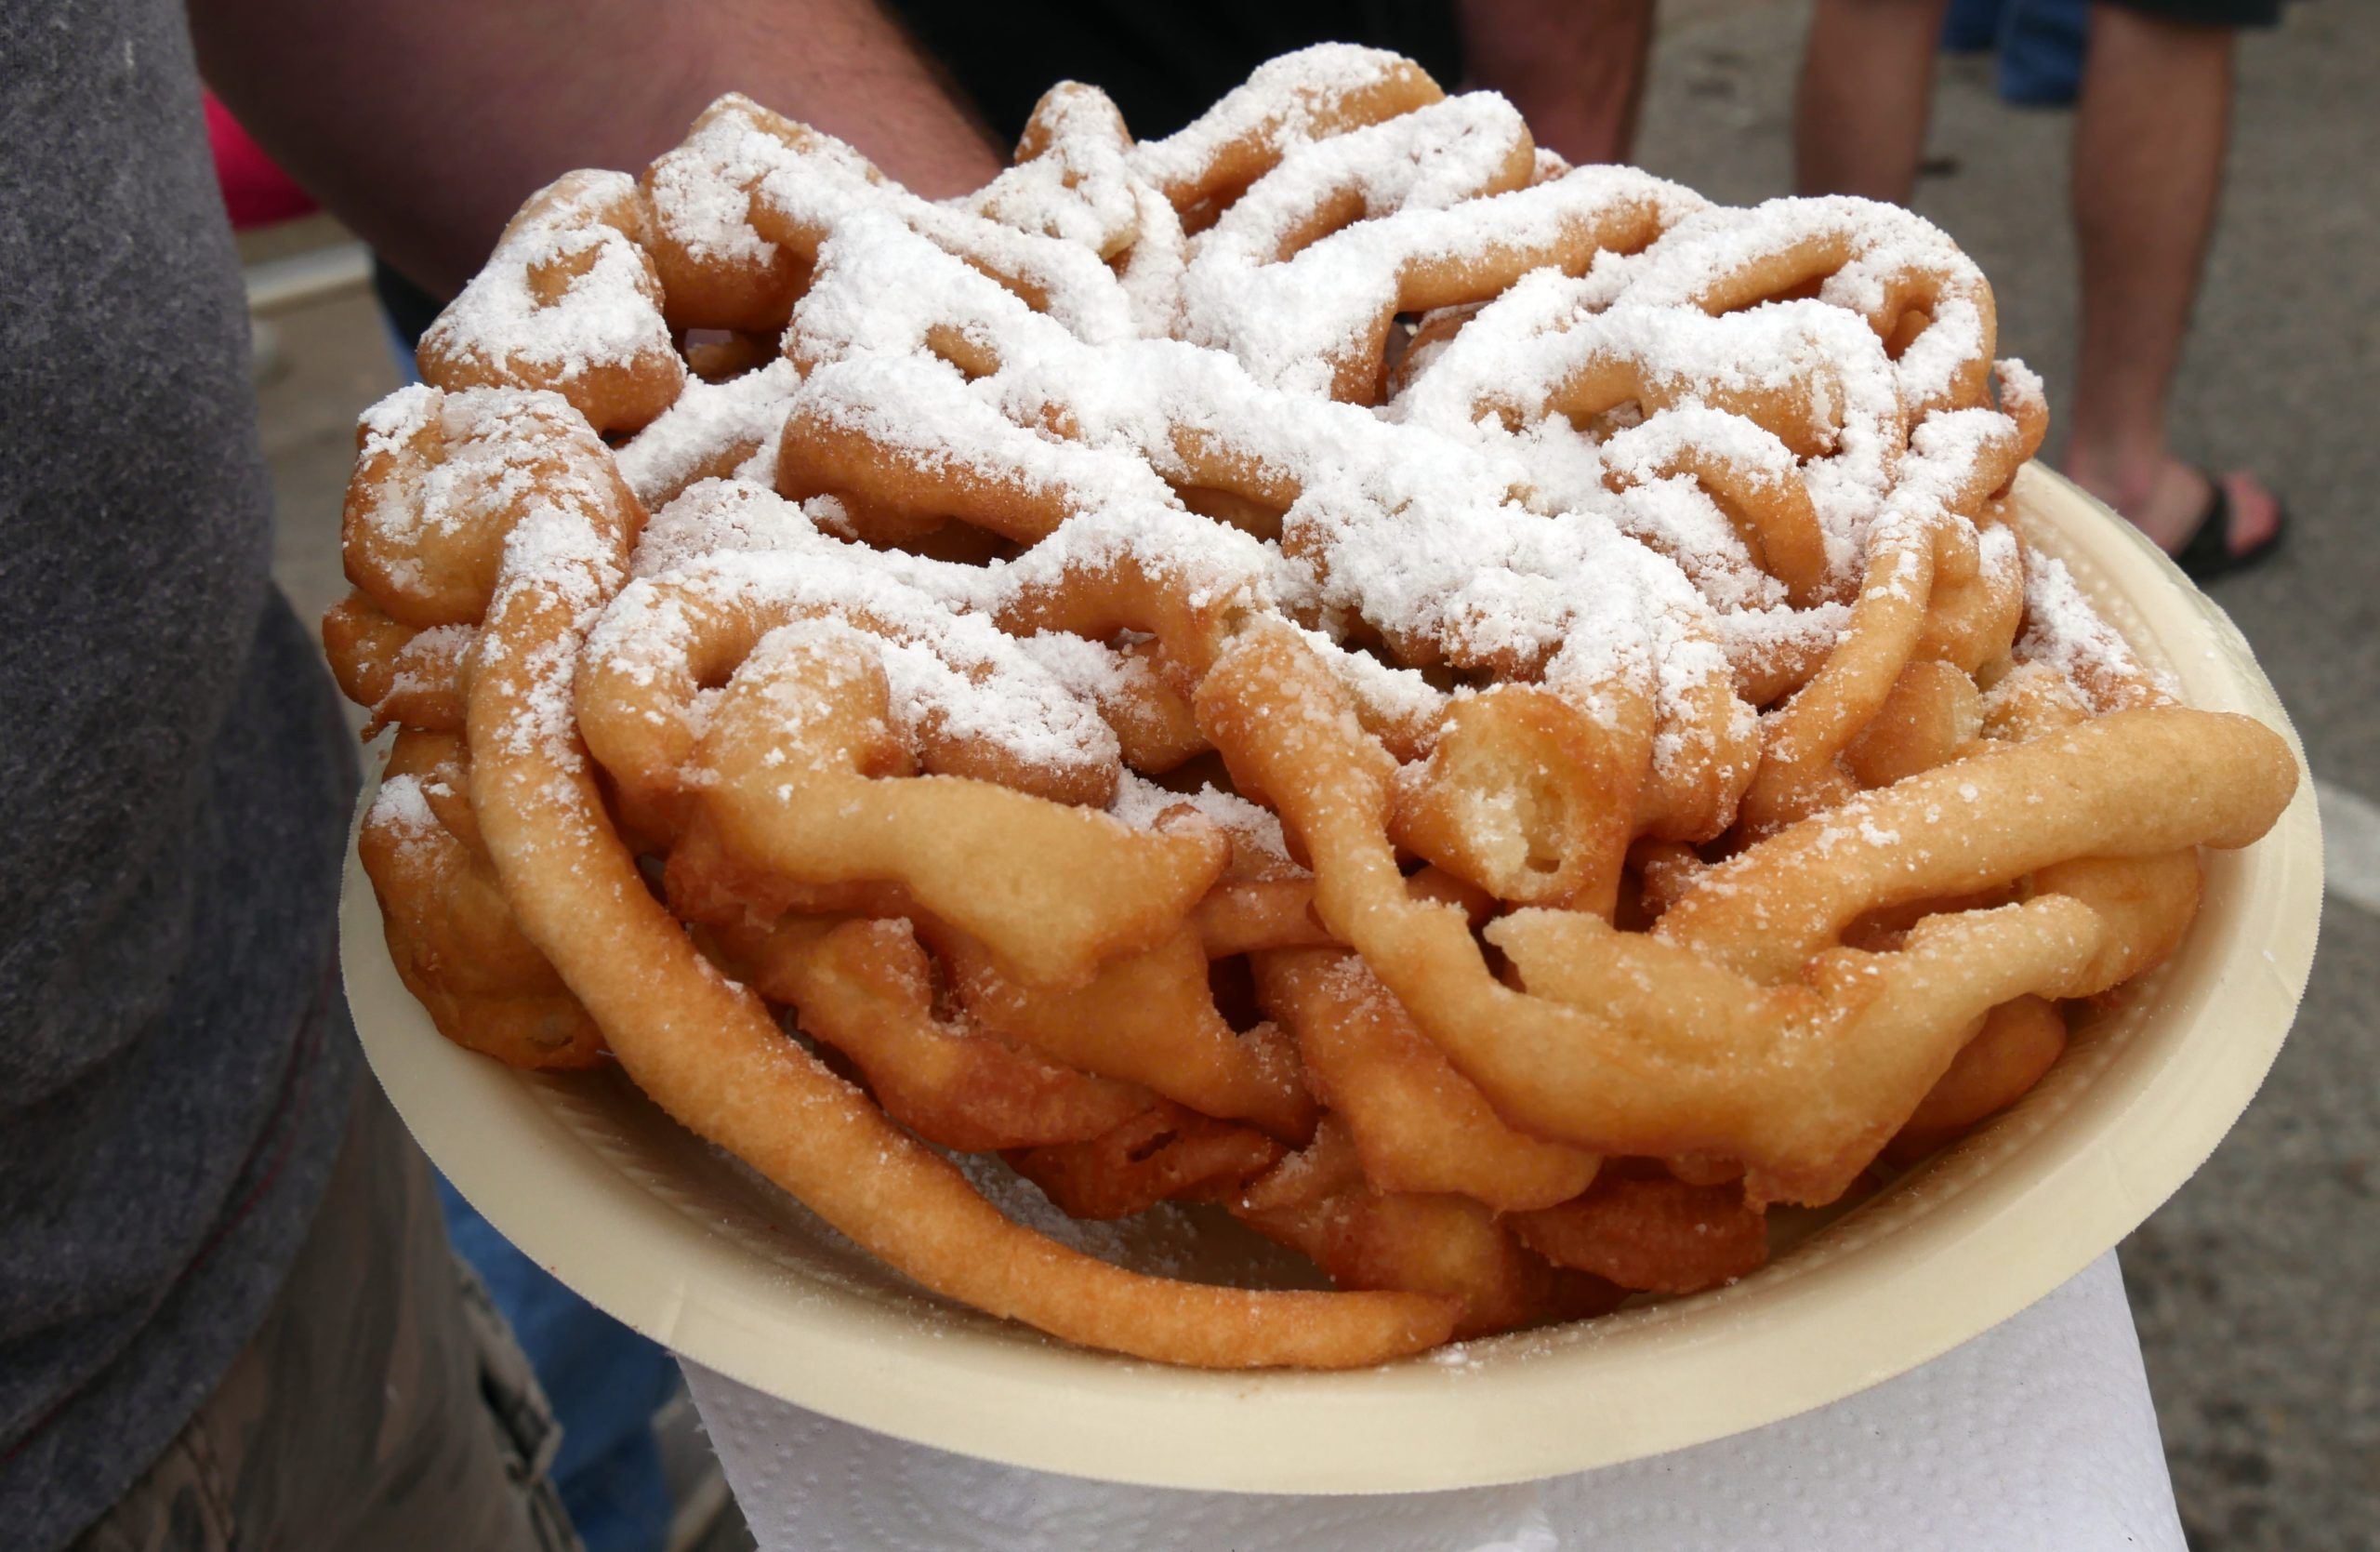 A hand holding a plate of funnel cake with powdered sugar on top